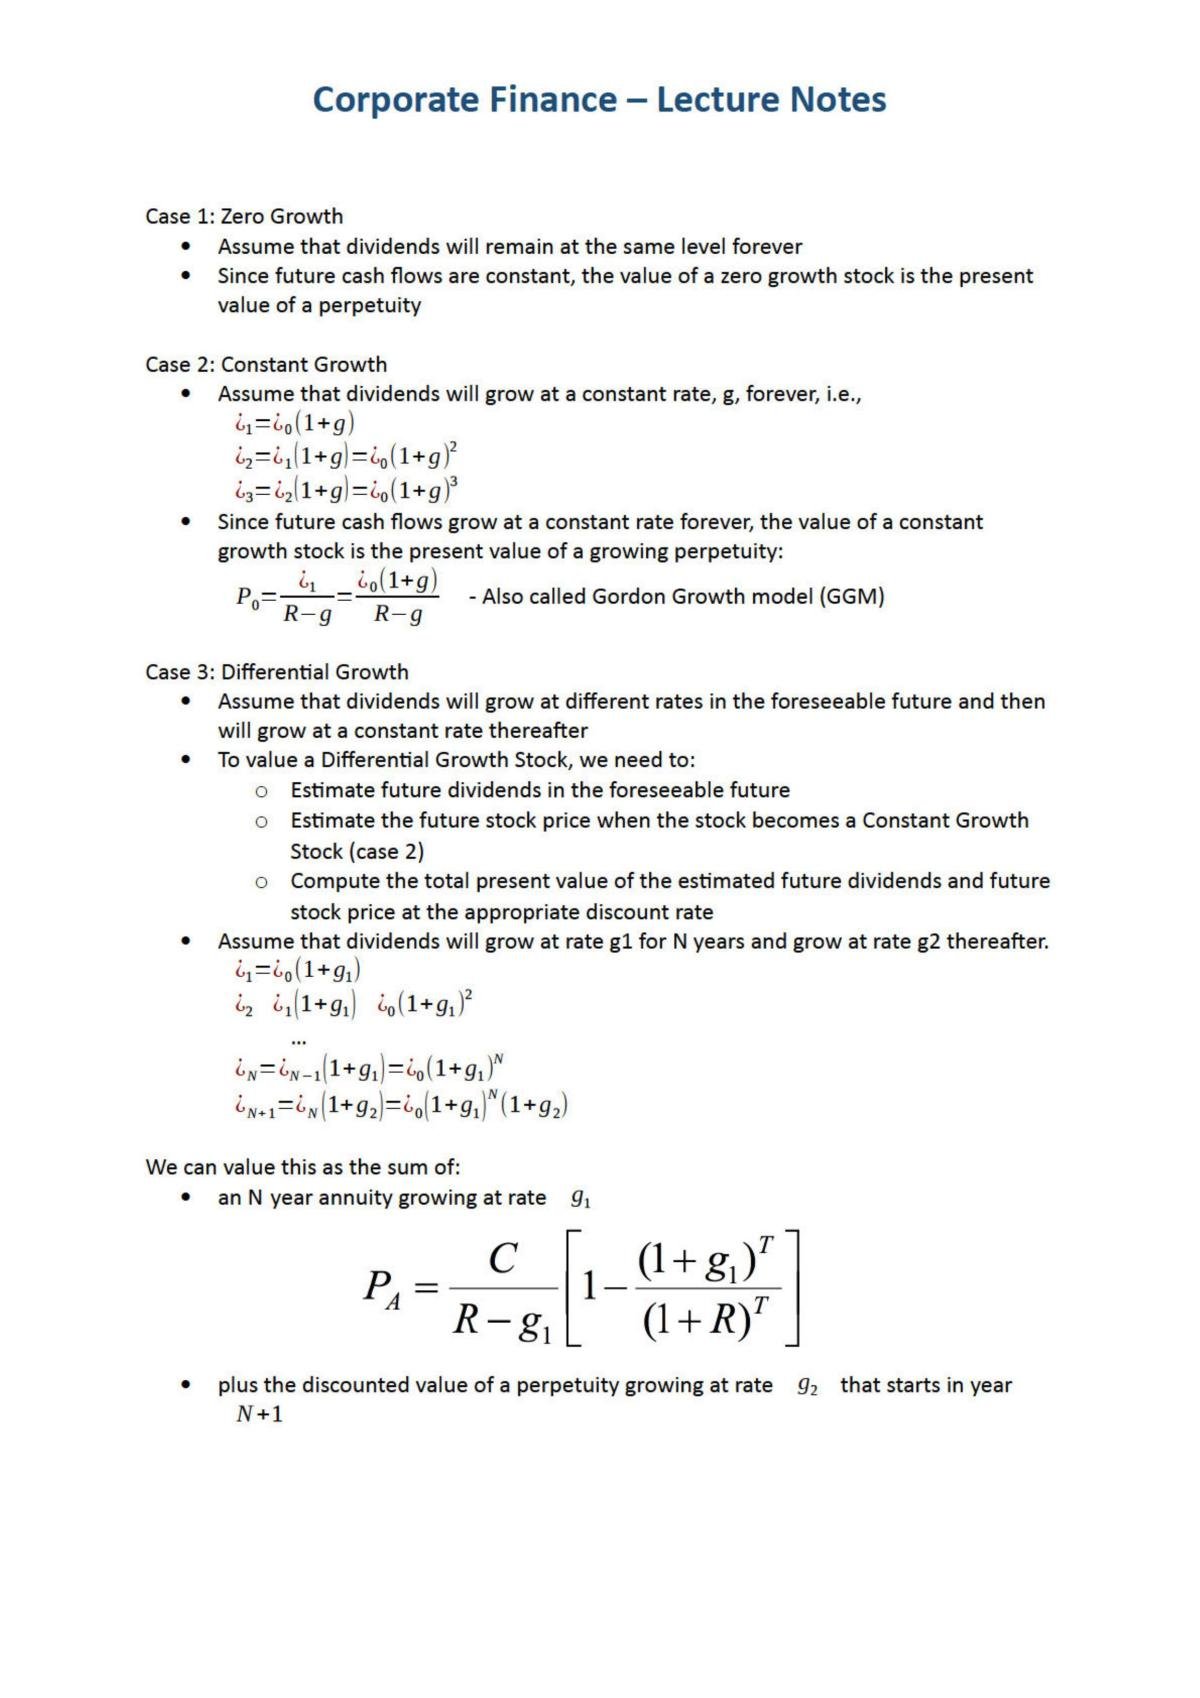 Corporate Finance Study Notes - Page 17